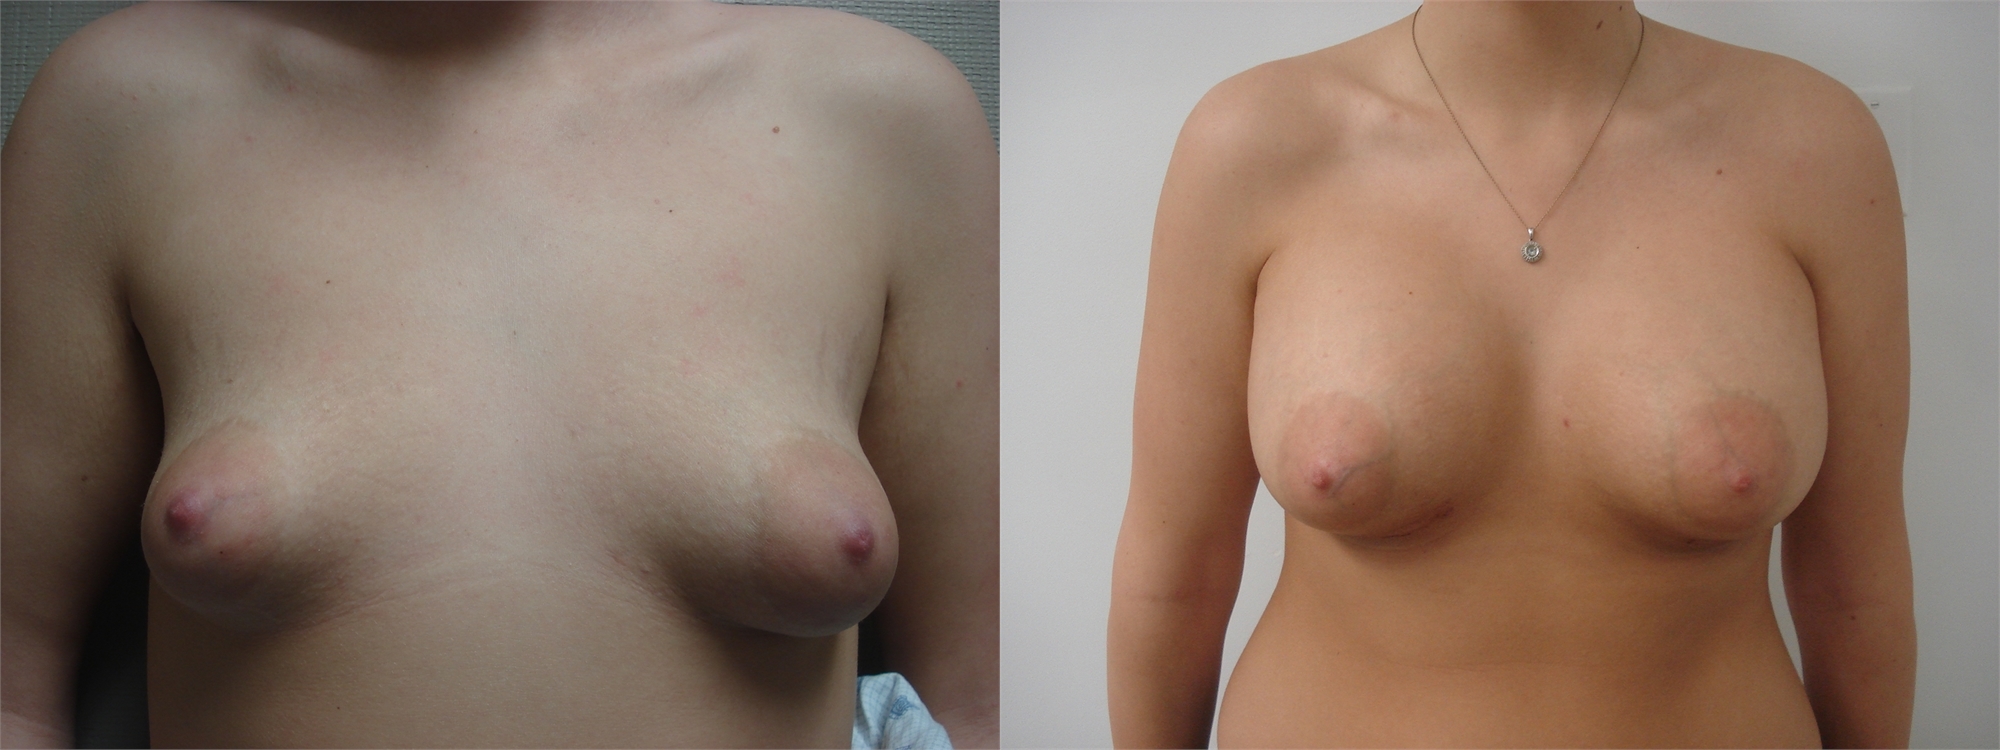 Breast Augmentation Before and After Seattle and Tacoma, WA